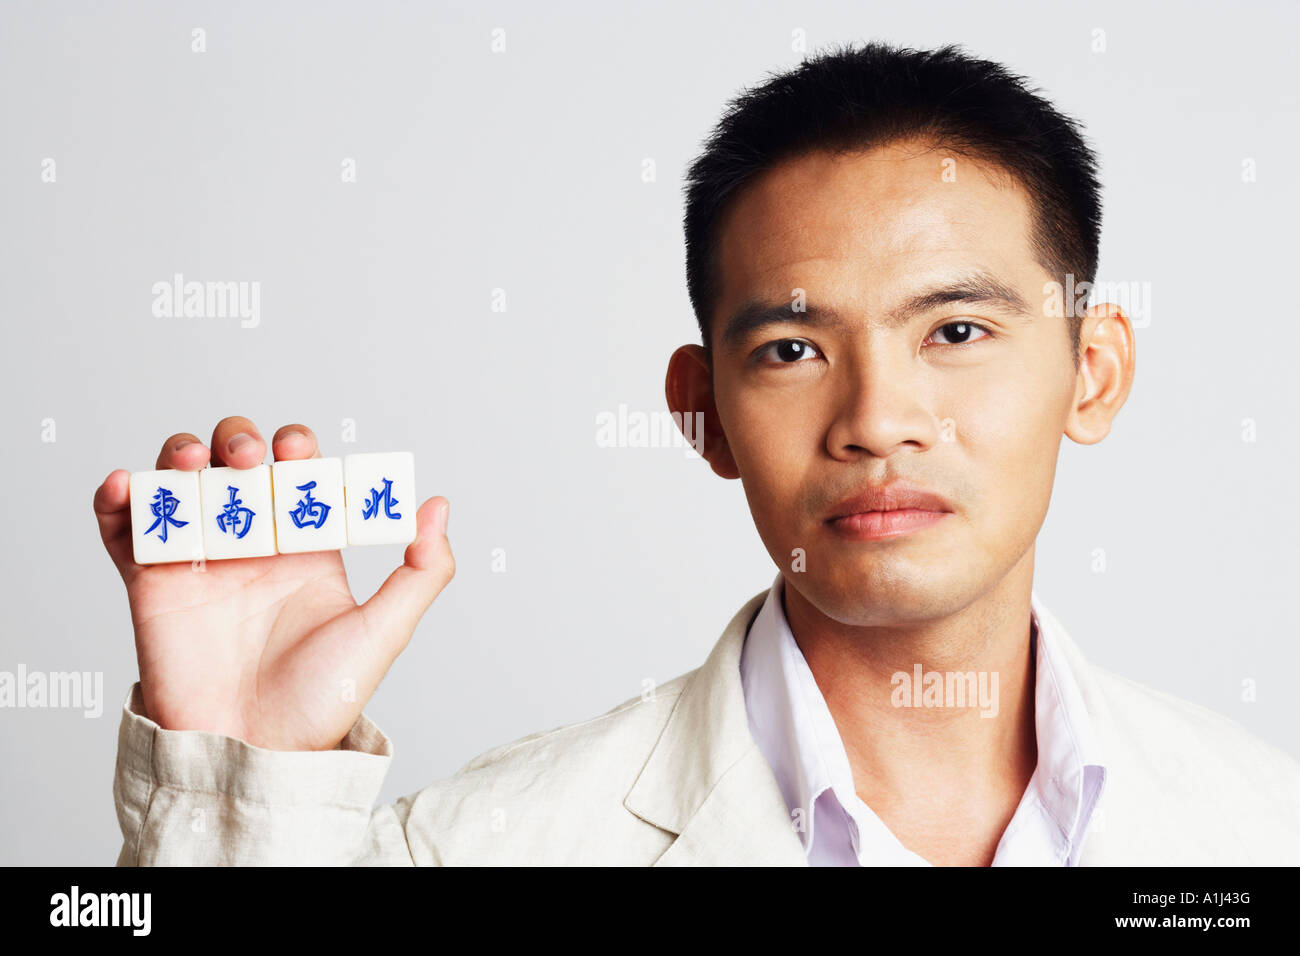 Portrait of a businessman holding marble cubes Stock Photo